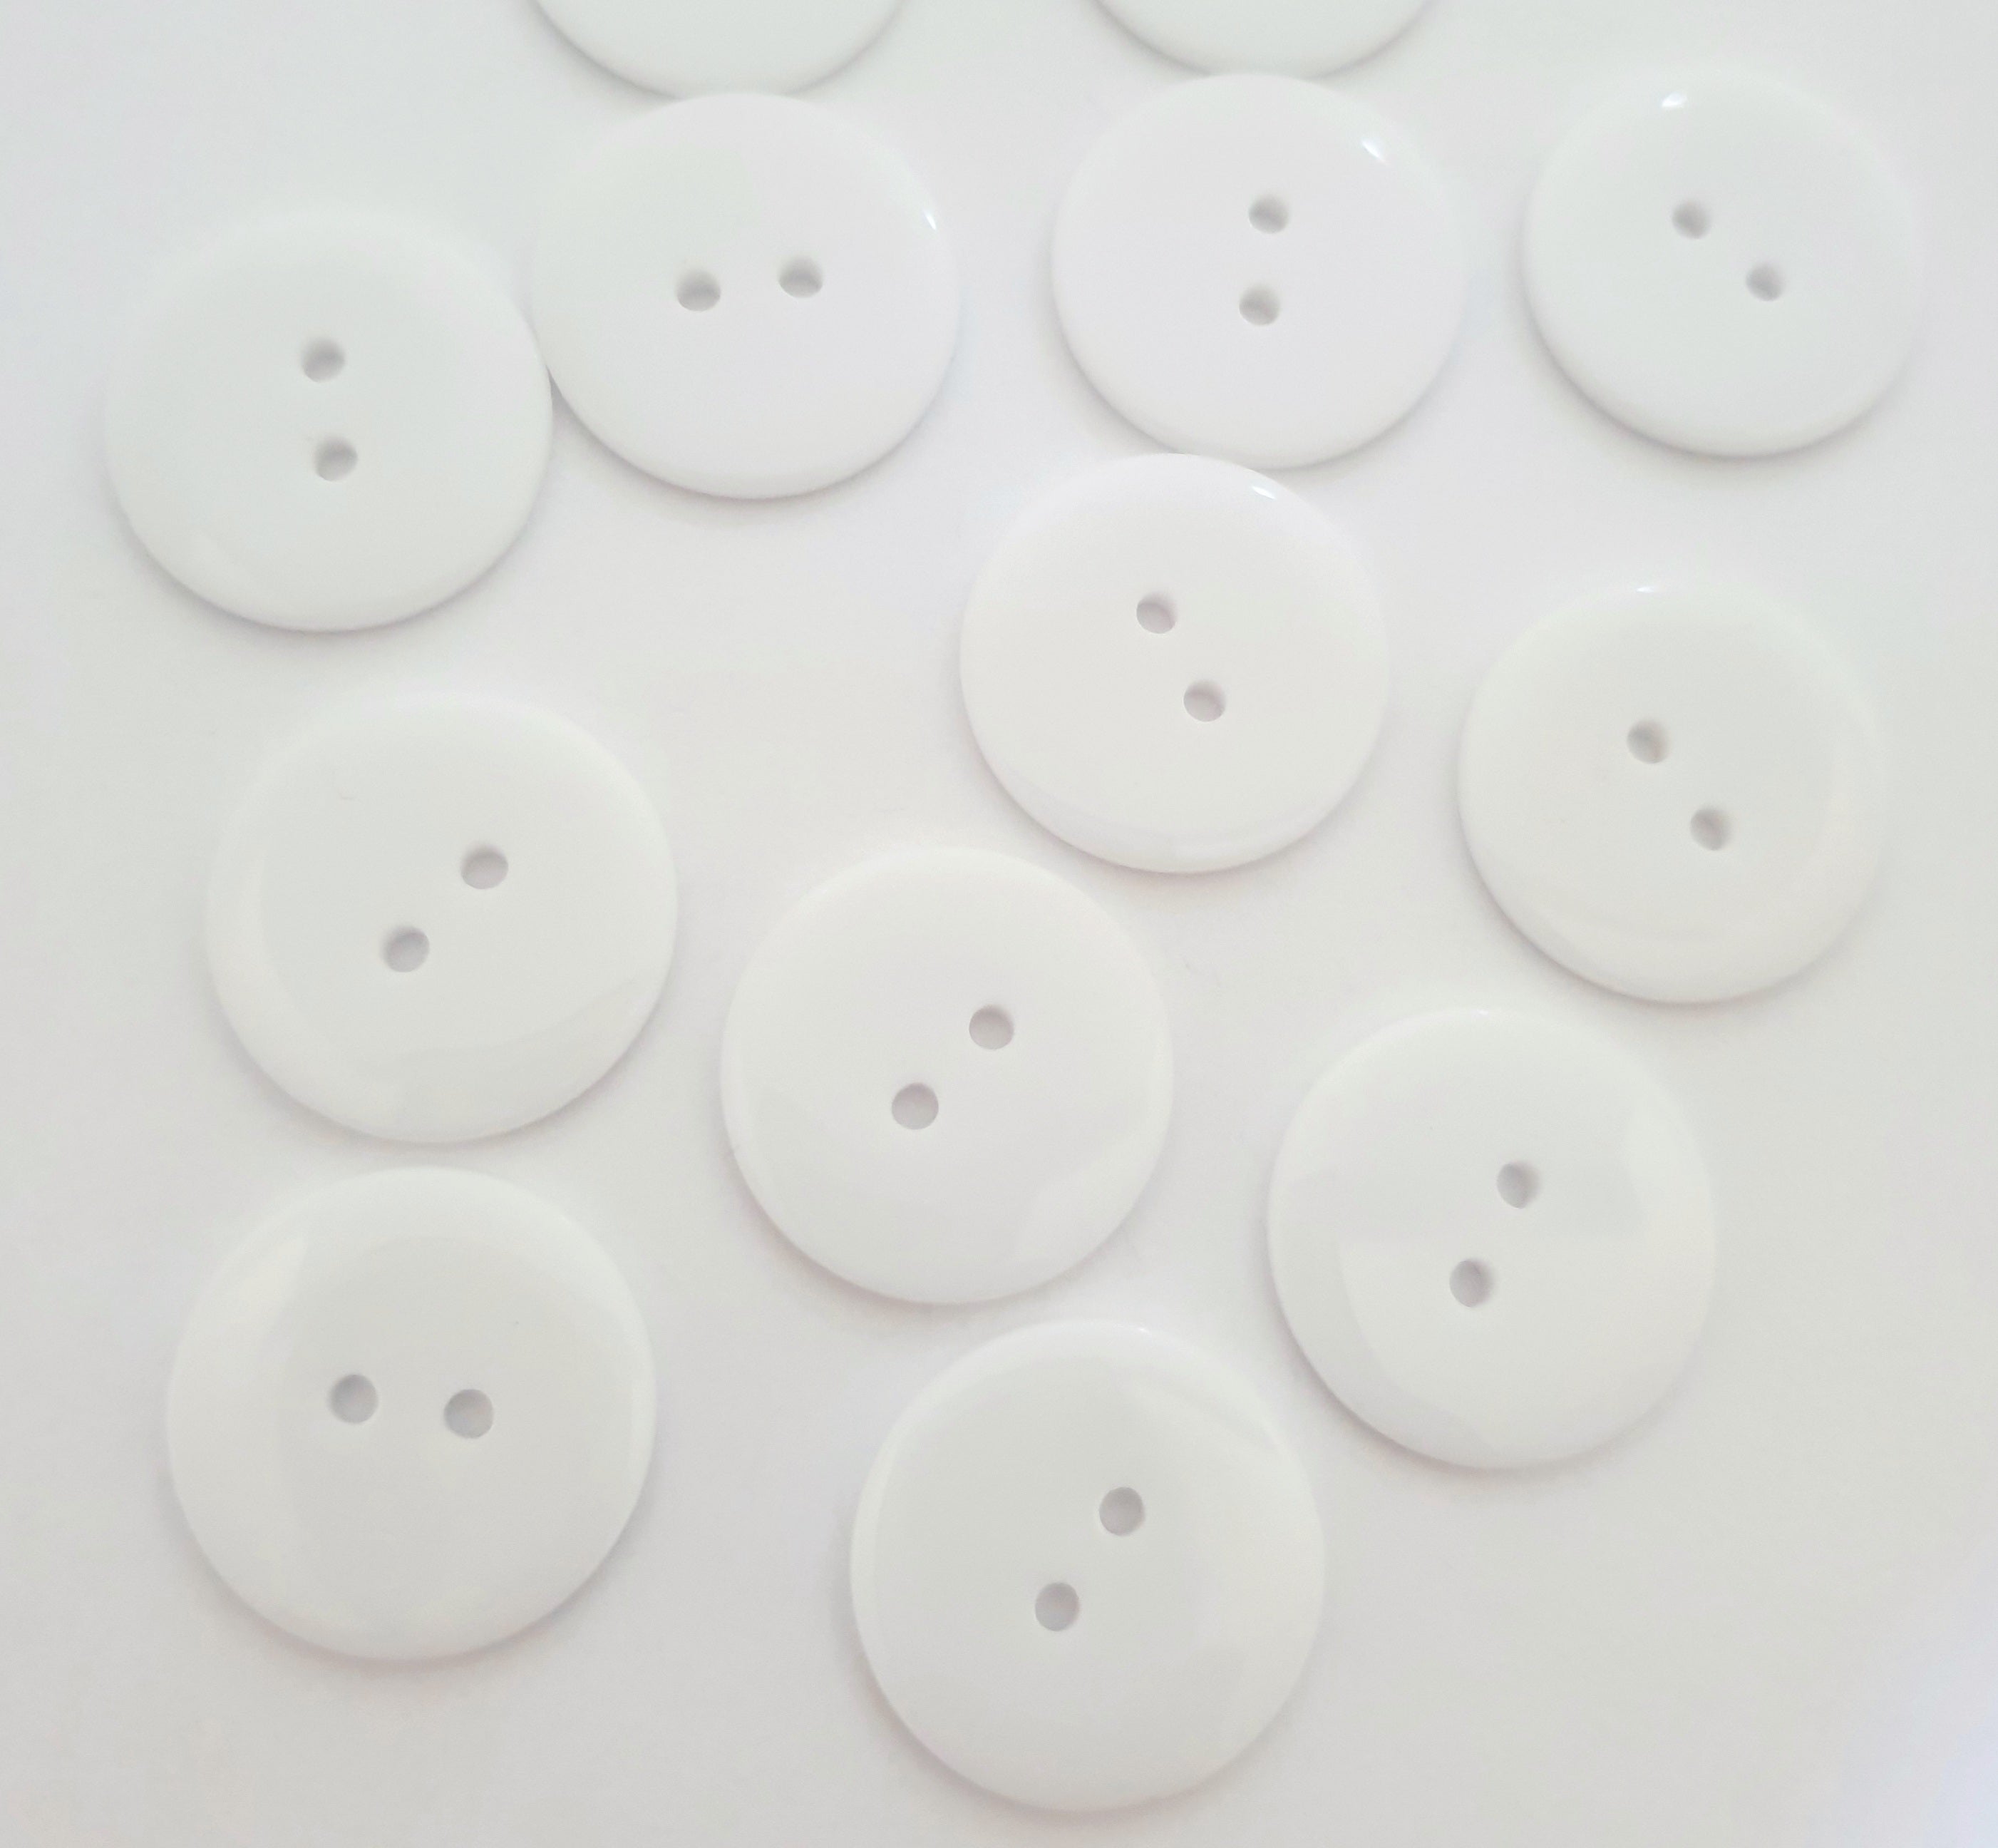 MajorCrafts 24pcs 25mm White 2 Holes Round Large Resin Sewing Buttons